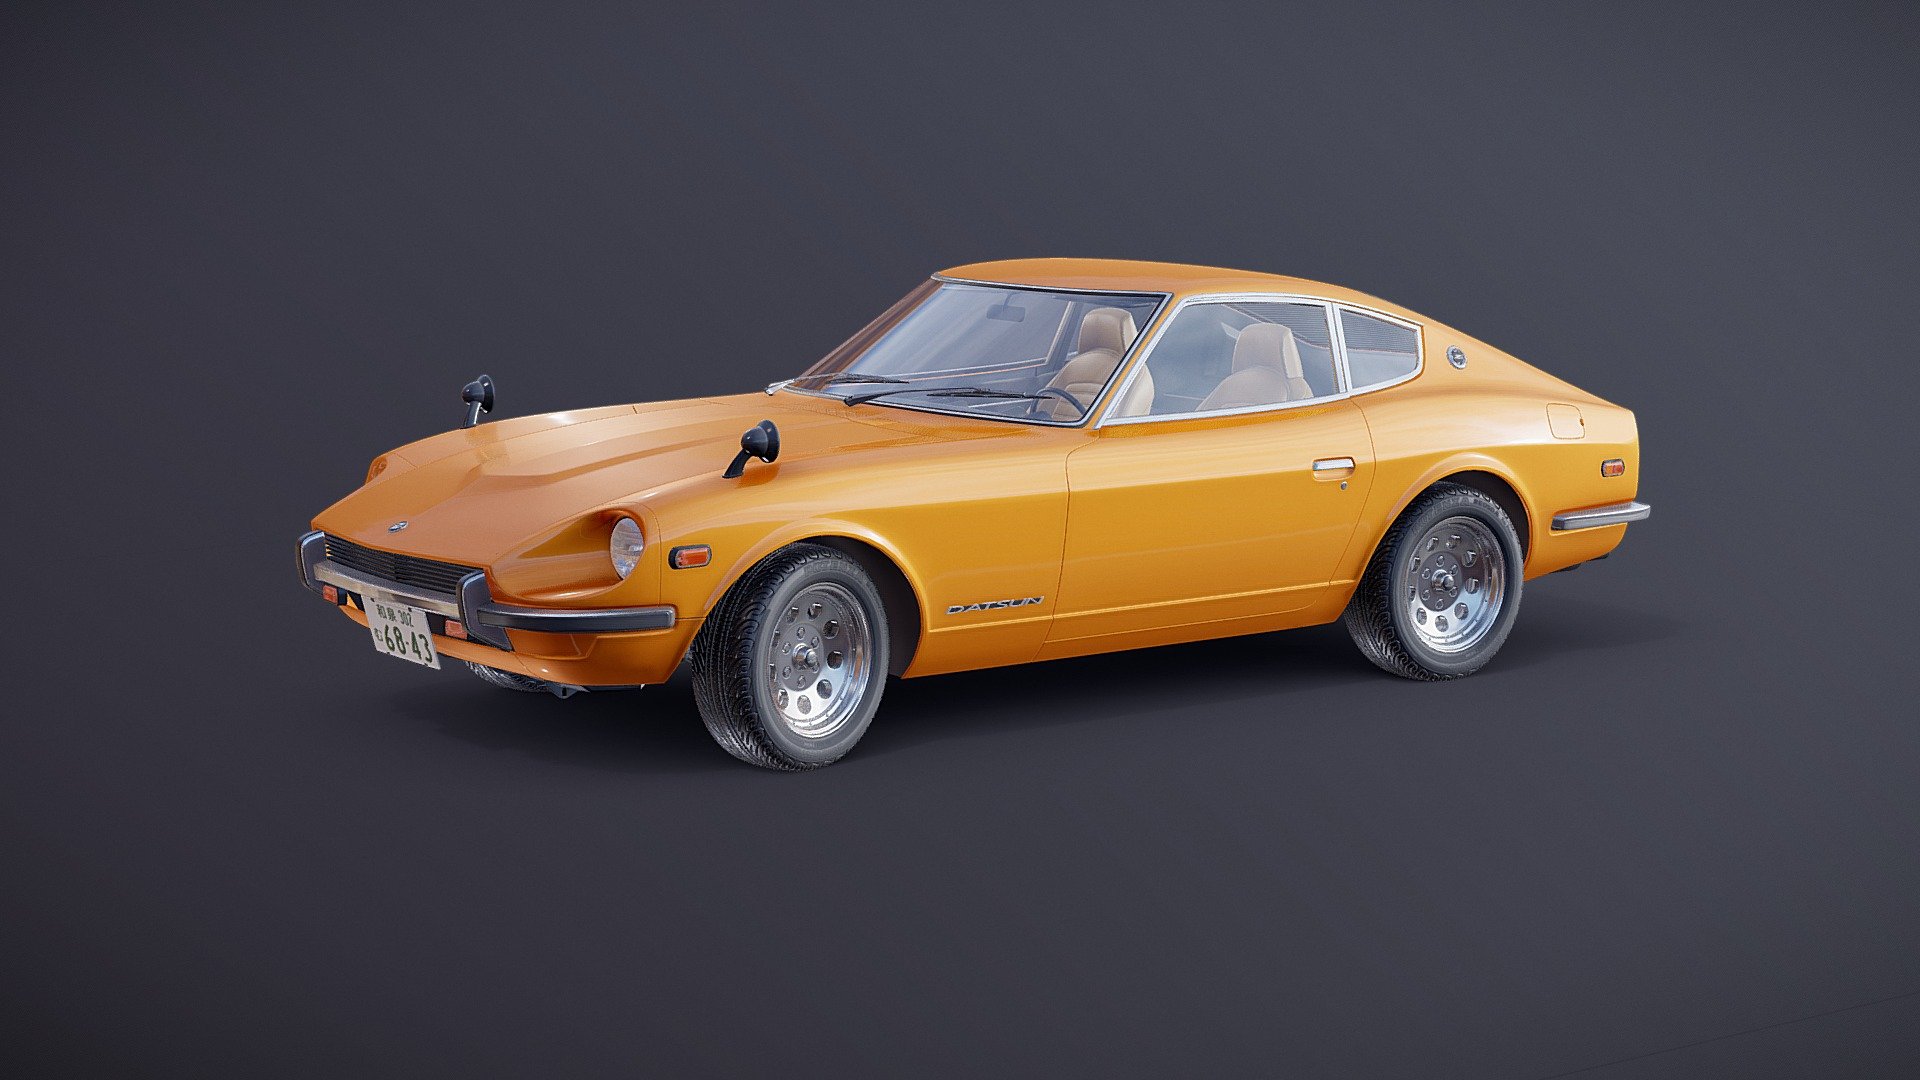 Datsun 240Z / Nissan Fairlady Z.
Mostly stock apart from a couple of tweaks, like non-stock rims 3d model